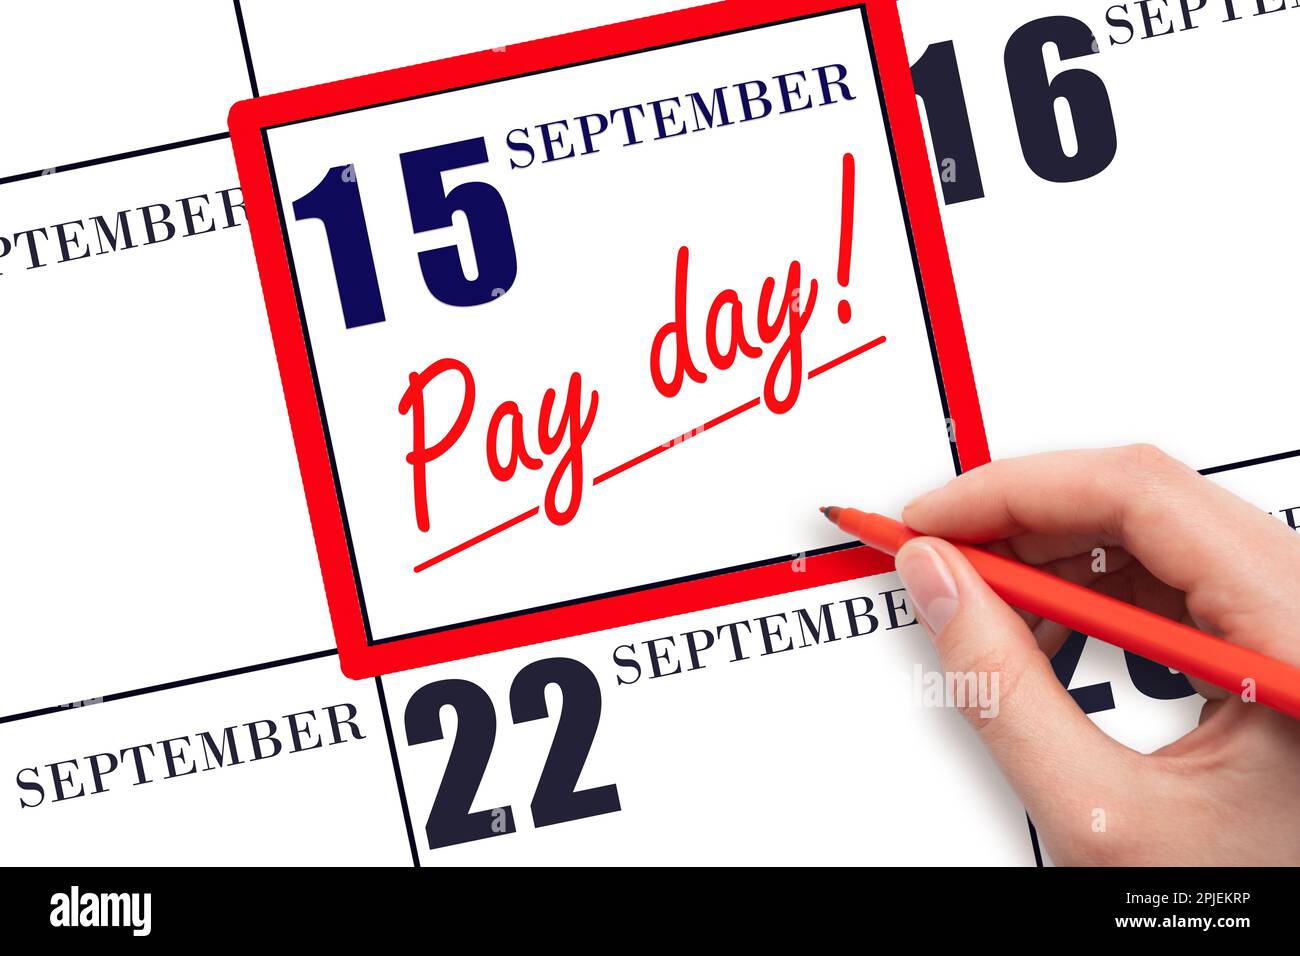 15th day of September. Hand writing text PAY DATE on calendar date September 15 and underline it. Payment due date. Reminder concept of payment. Autum Stock Photo